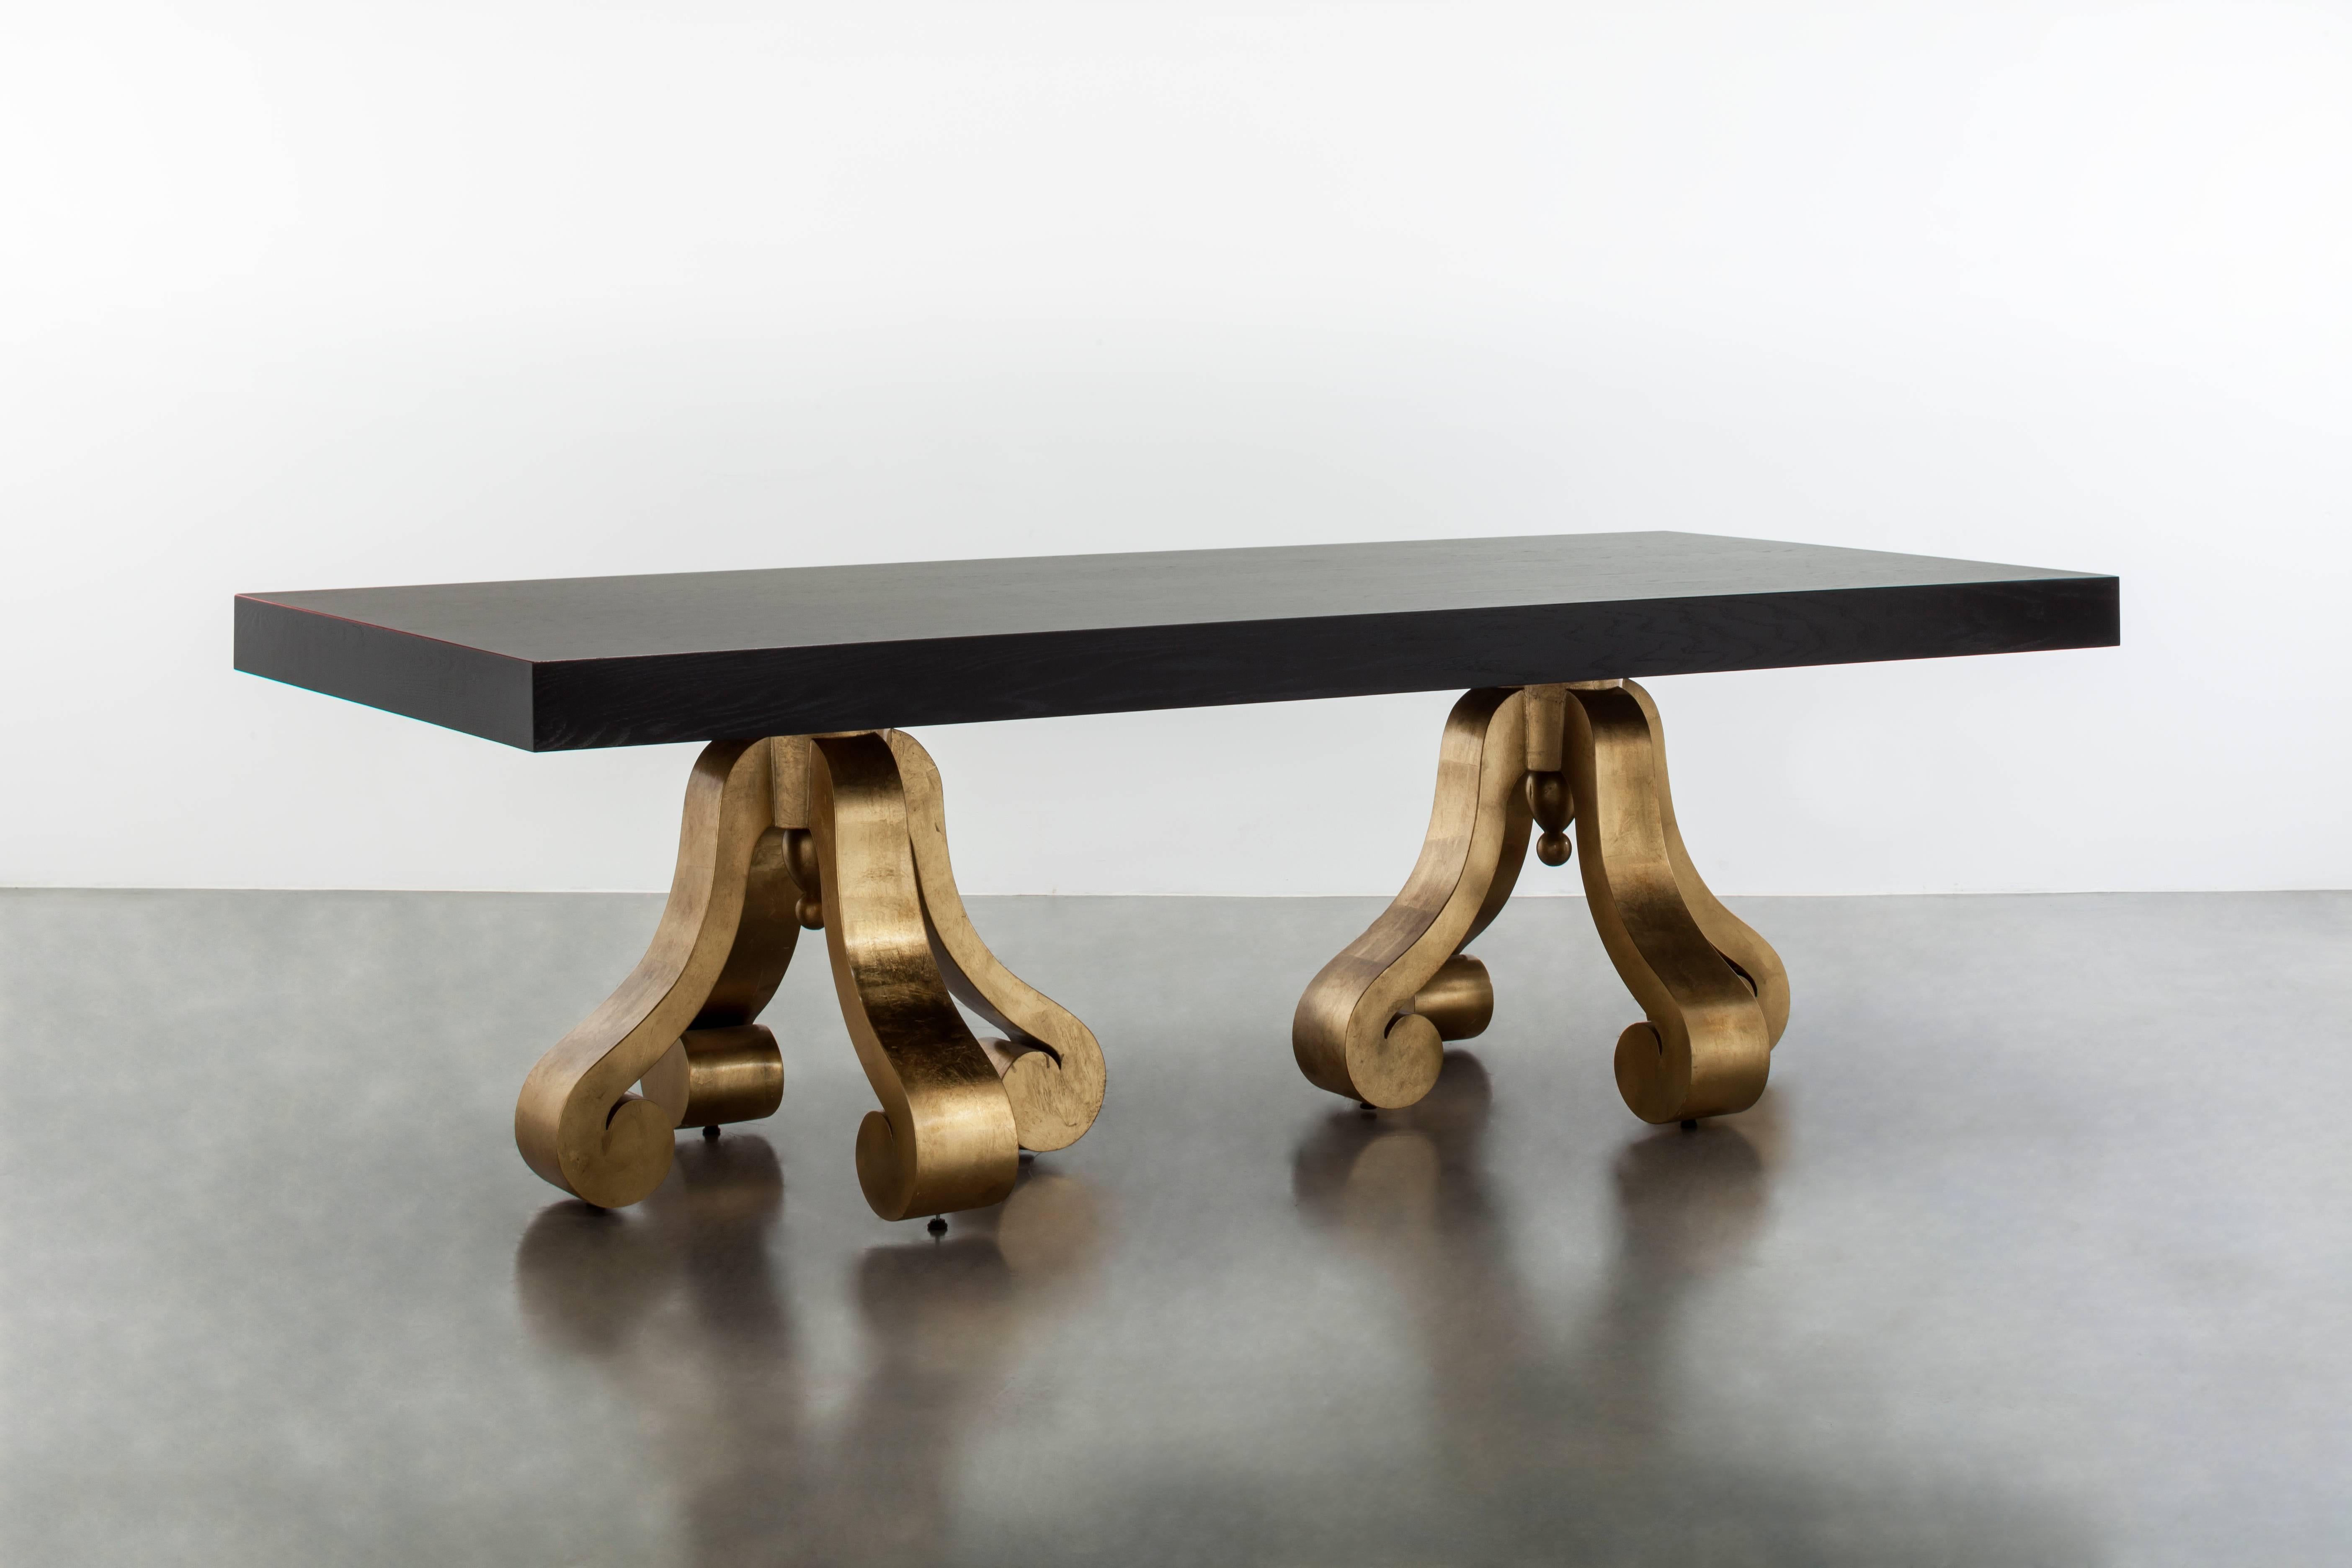 The Lille dining table is a modern dining table featuring two gold leaf pedestals suspending an ebony oak top. Fully custom and made to order in California. As shown in ebony oak $17,325.00. Starting at $14,015.00.